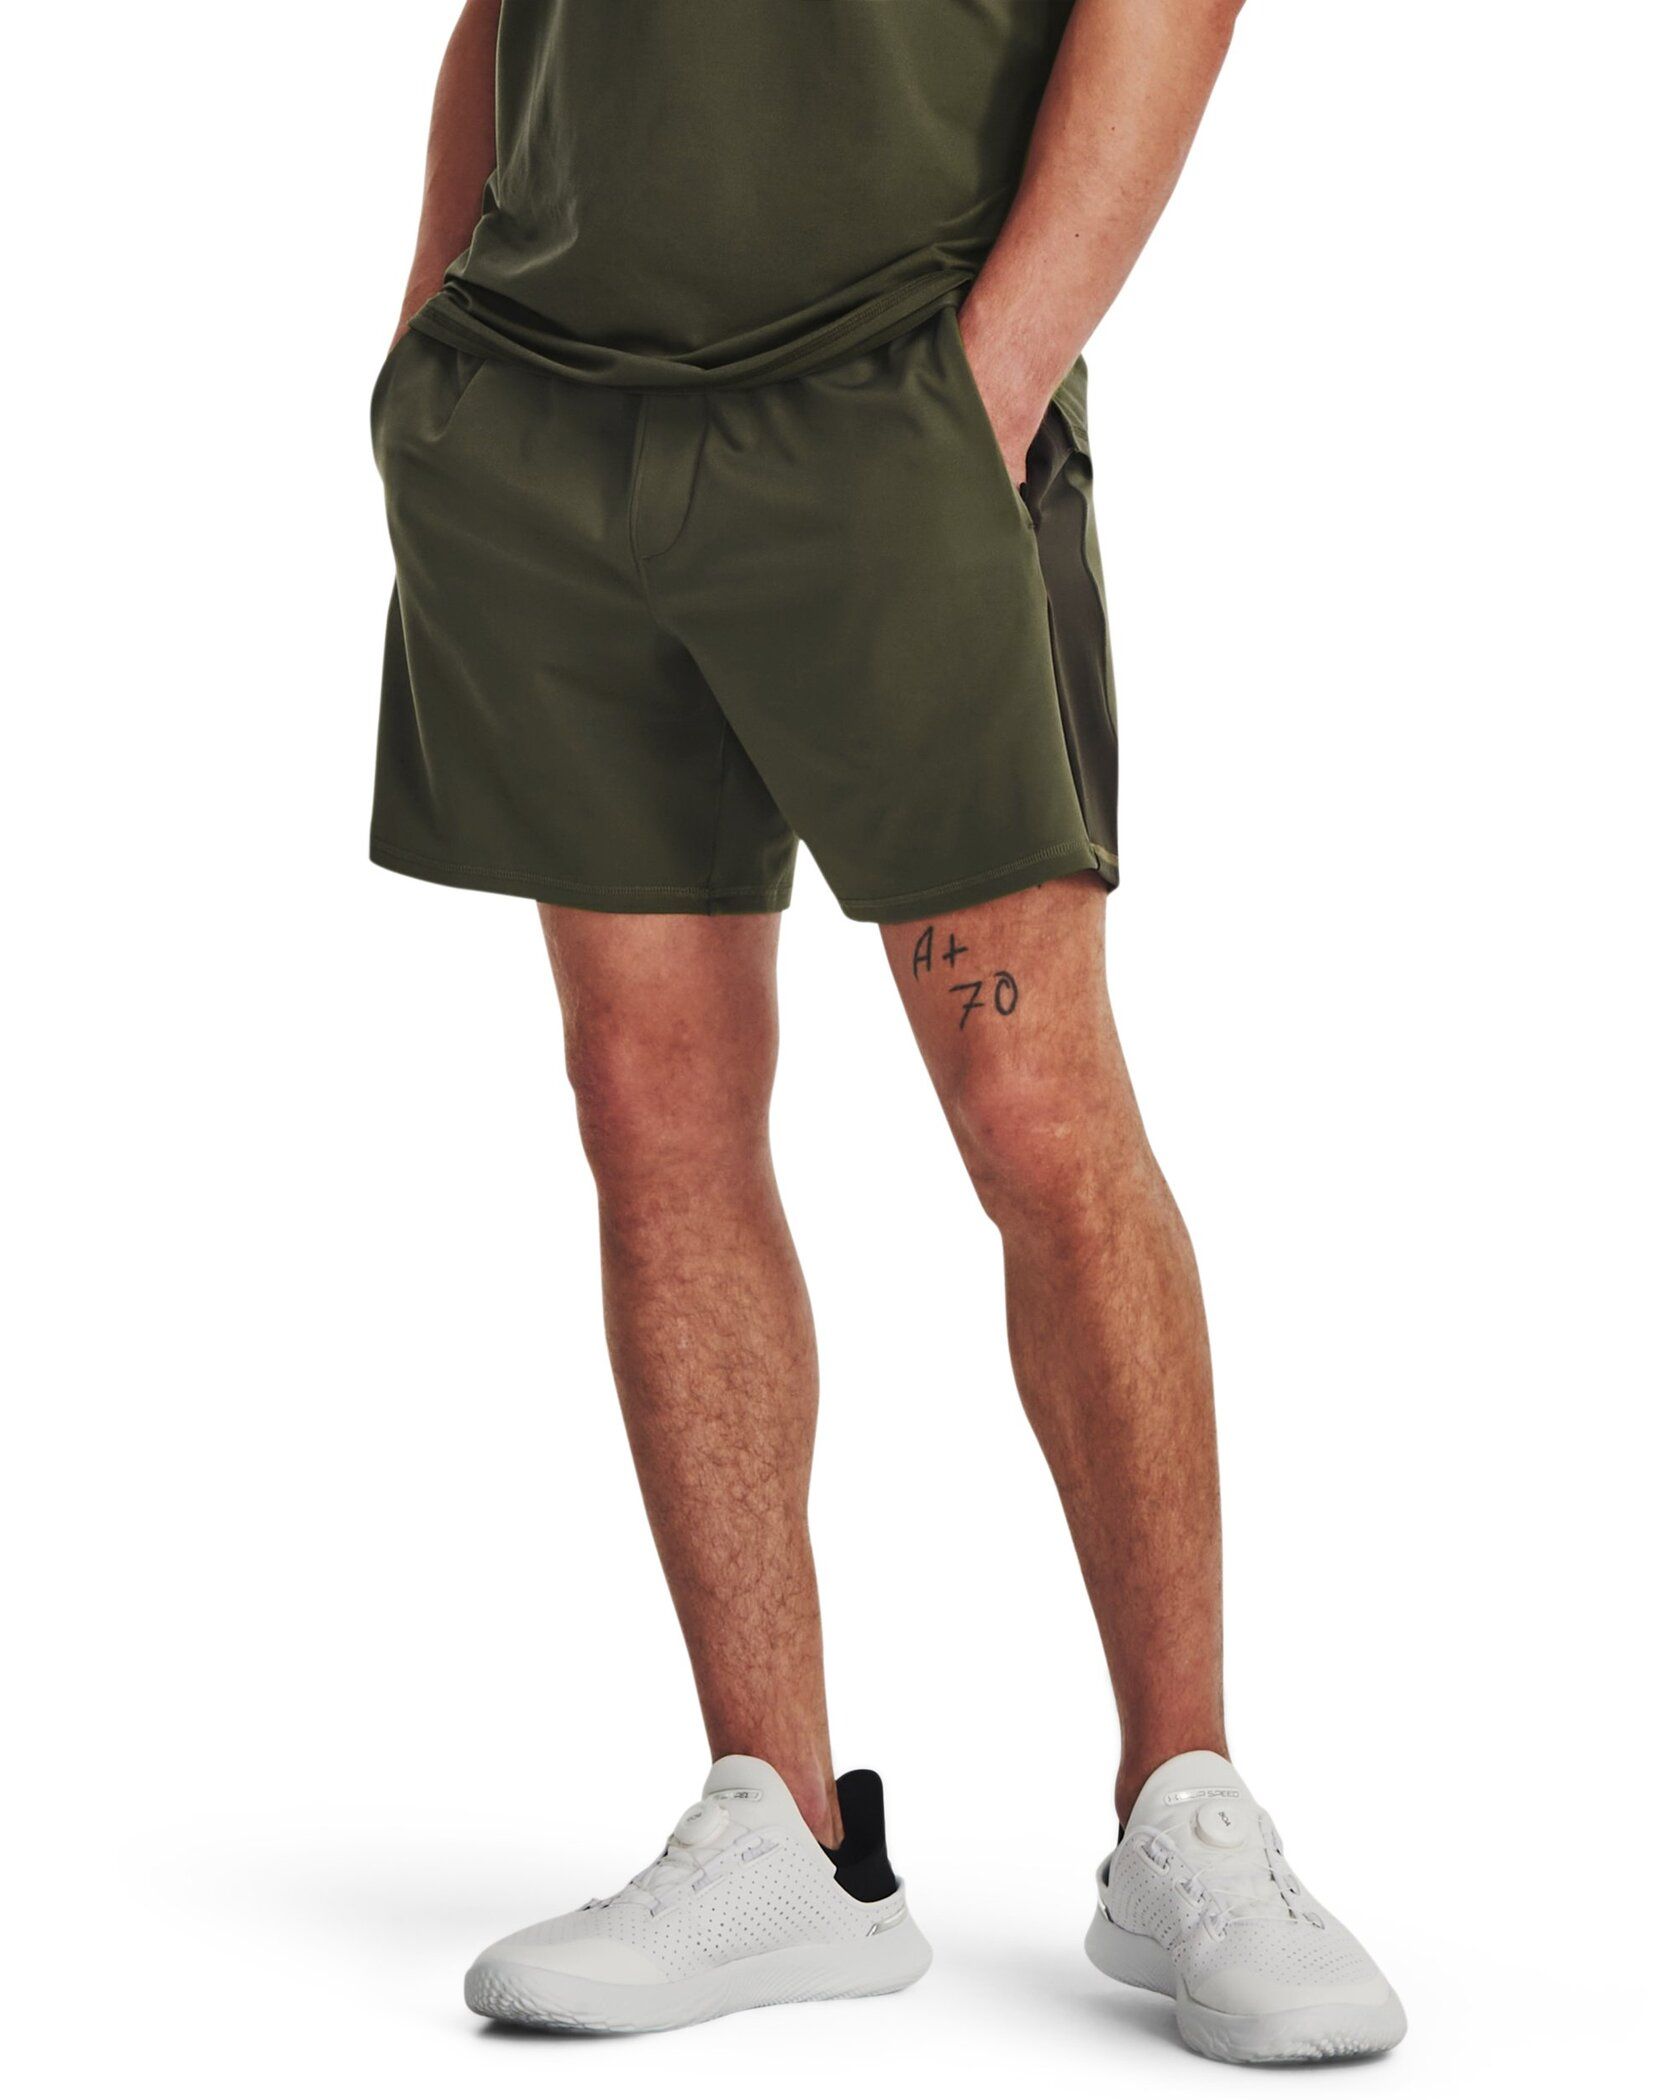 Kydra Flex Shorts - Invented for the Urban Athlete